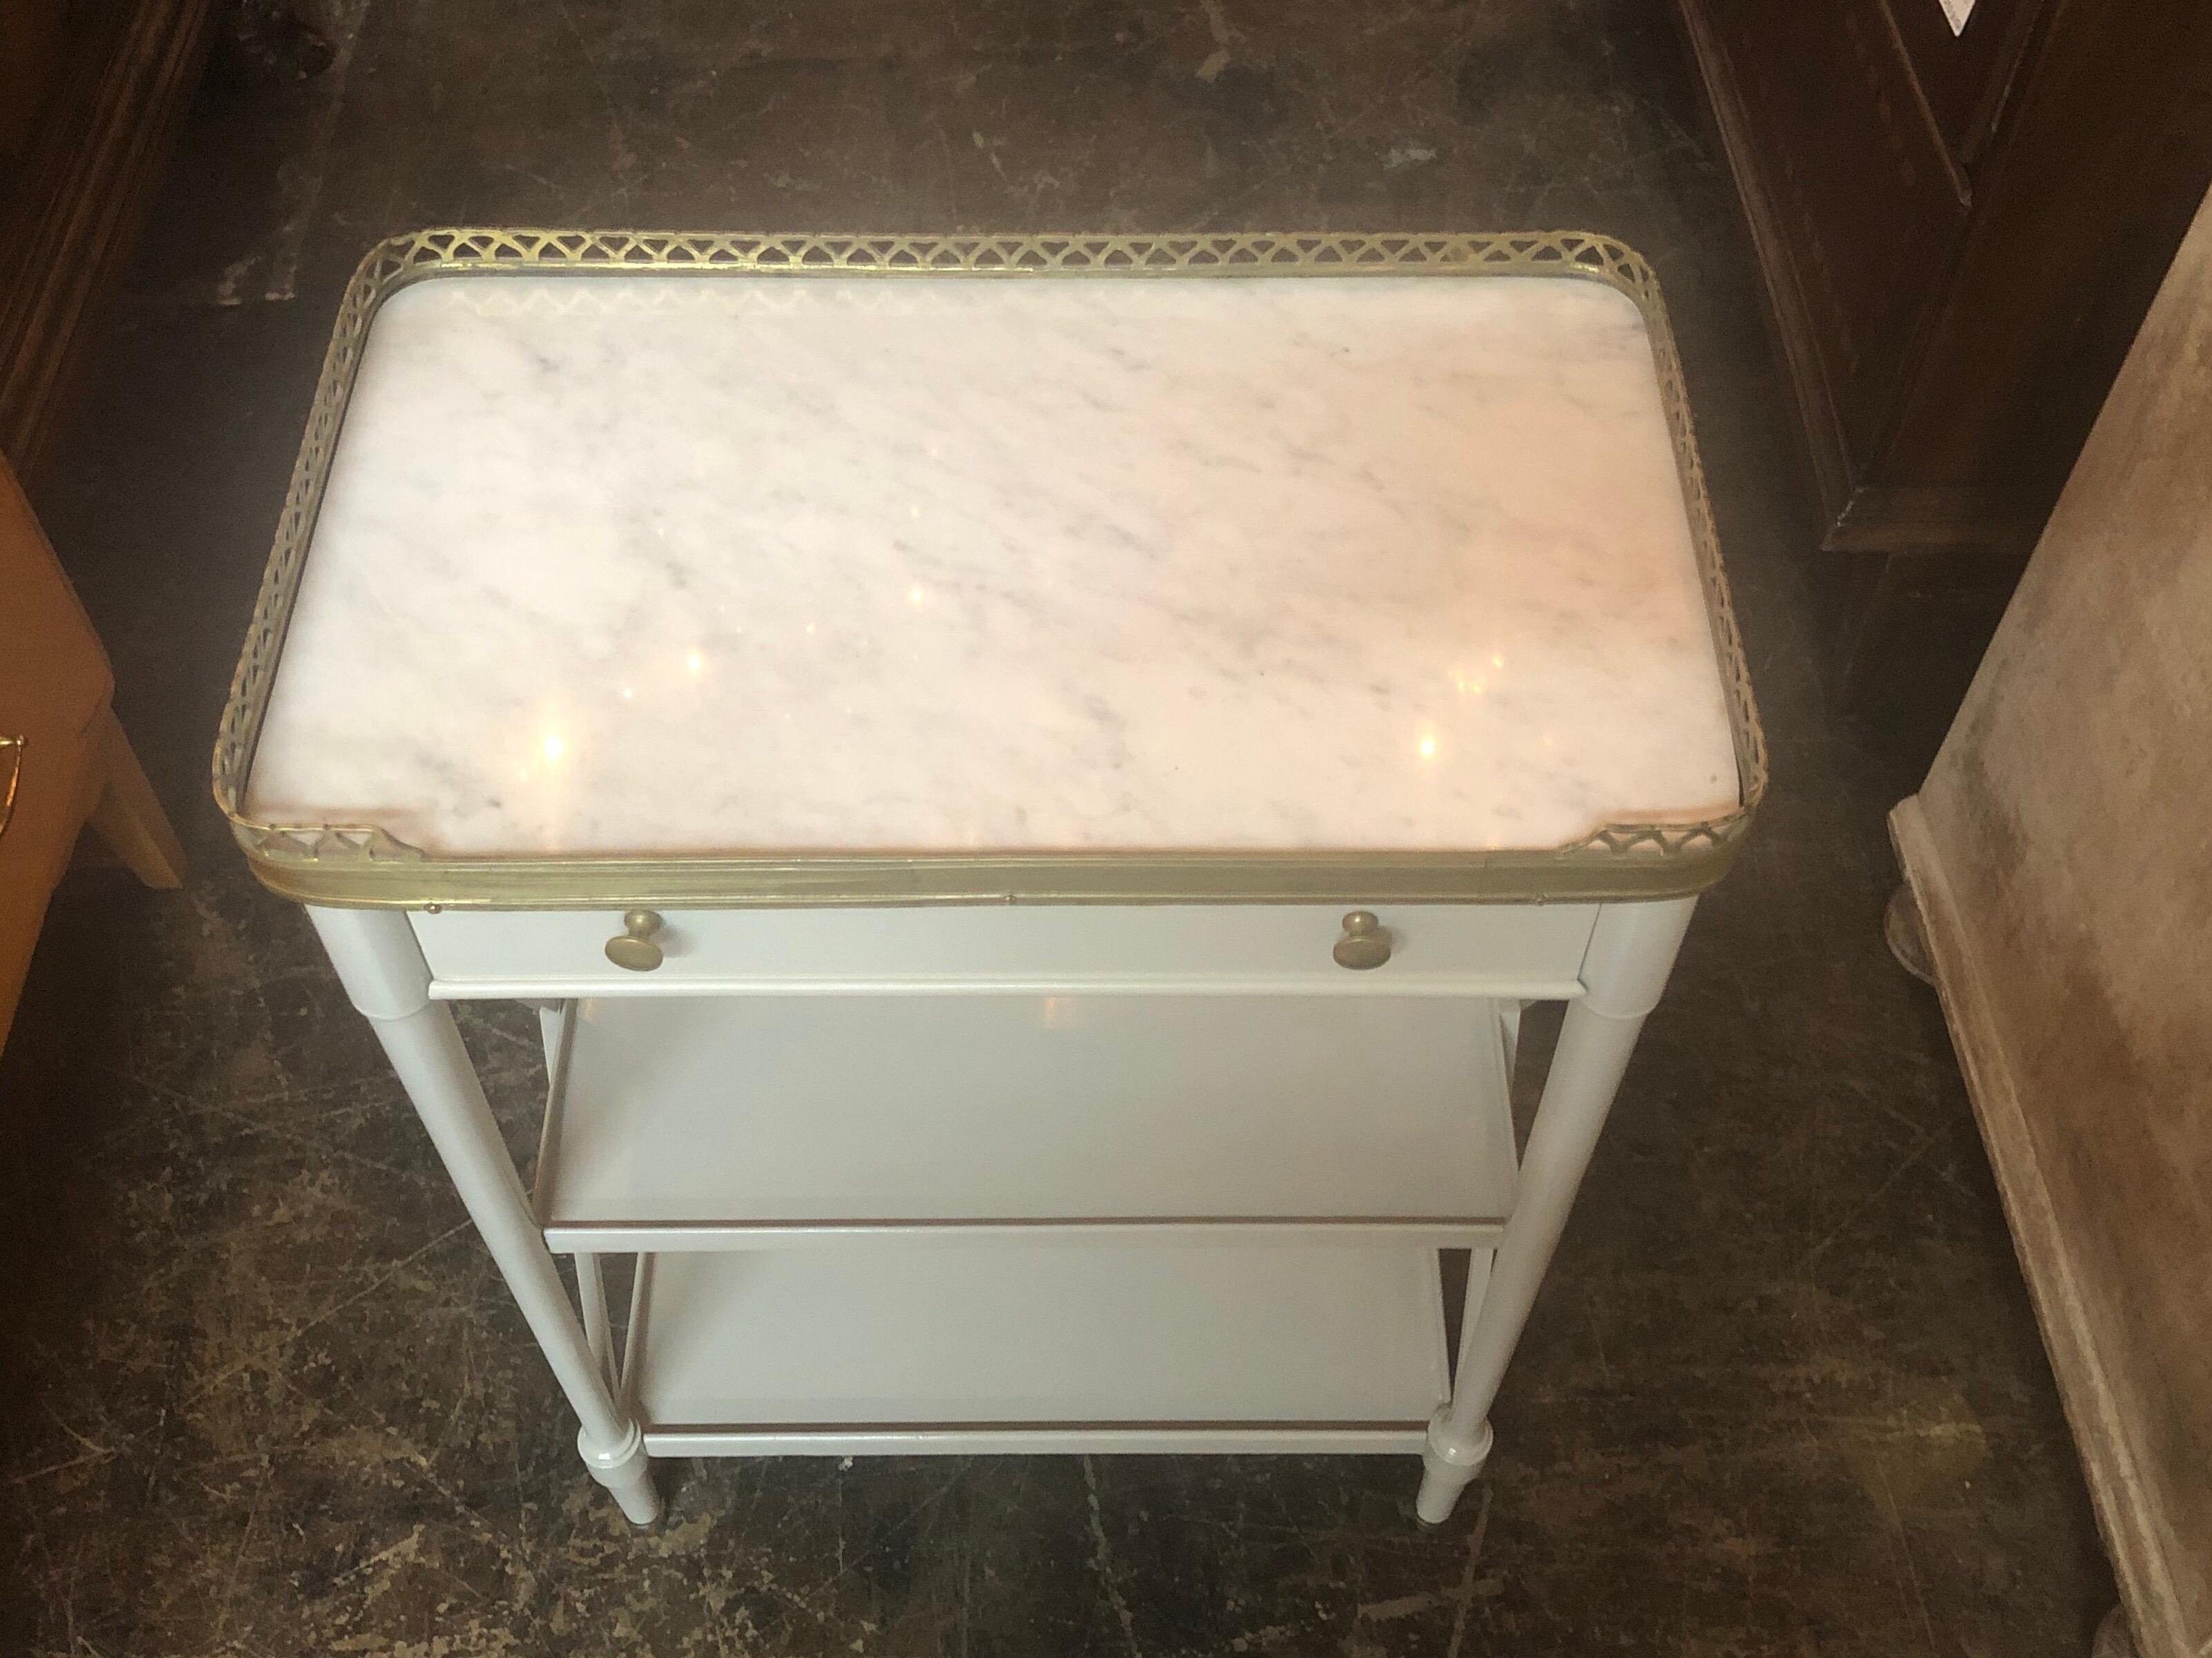 Beautiful French Directoire' style grey lacquered side table. The table has a brass gallery and a lovely Carrara marble top. A very pretty piece!